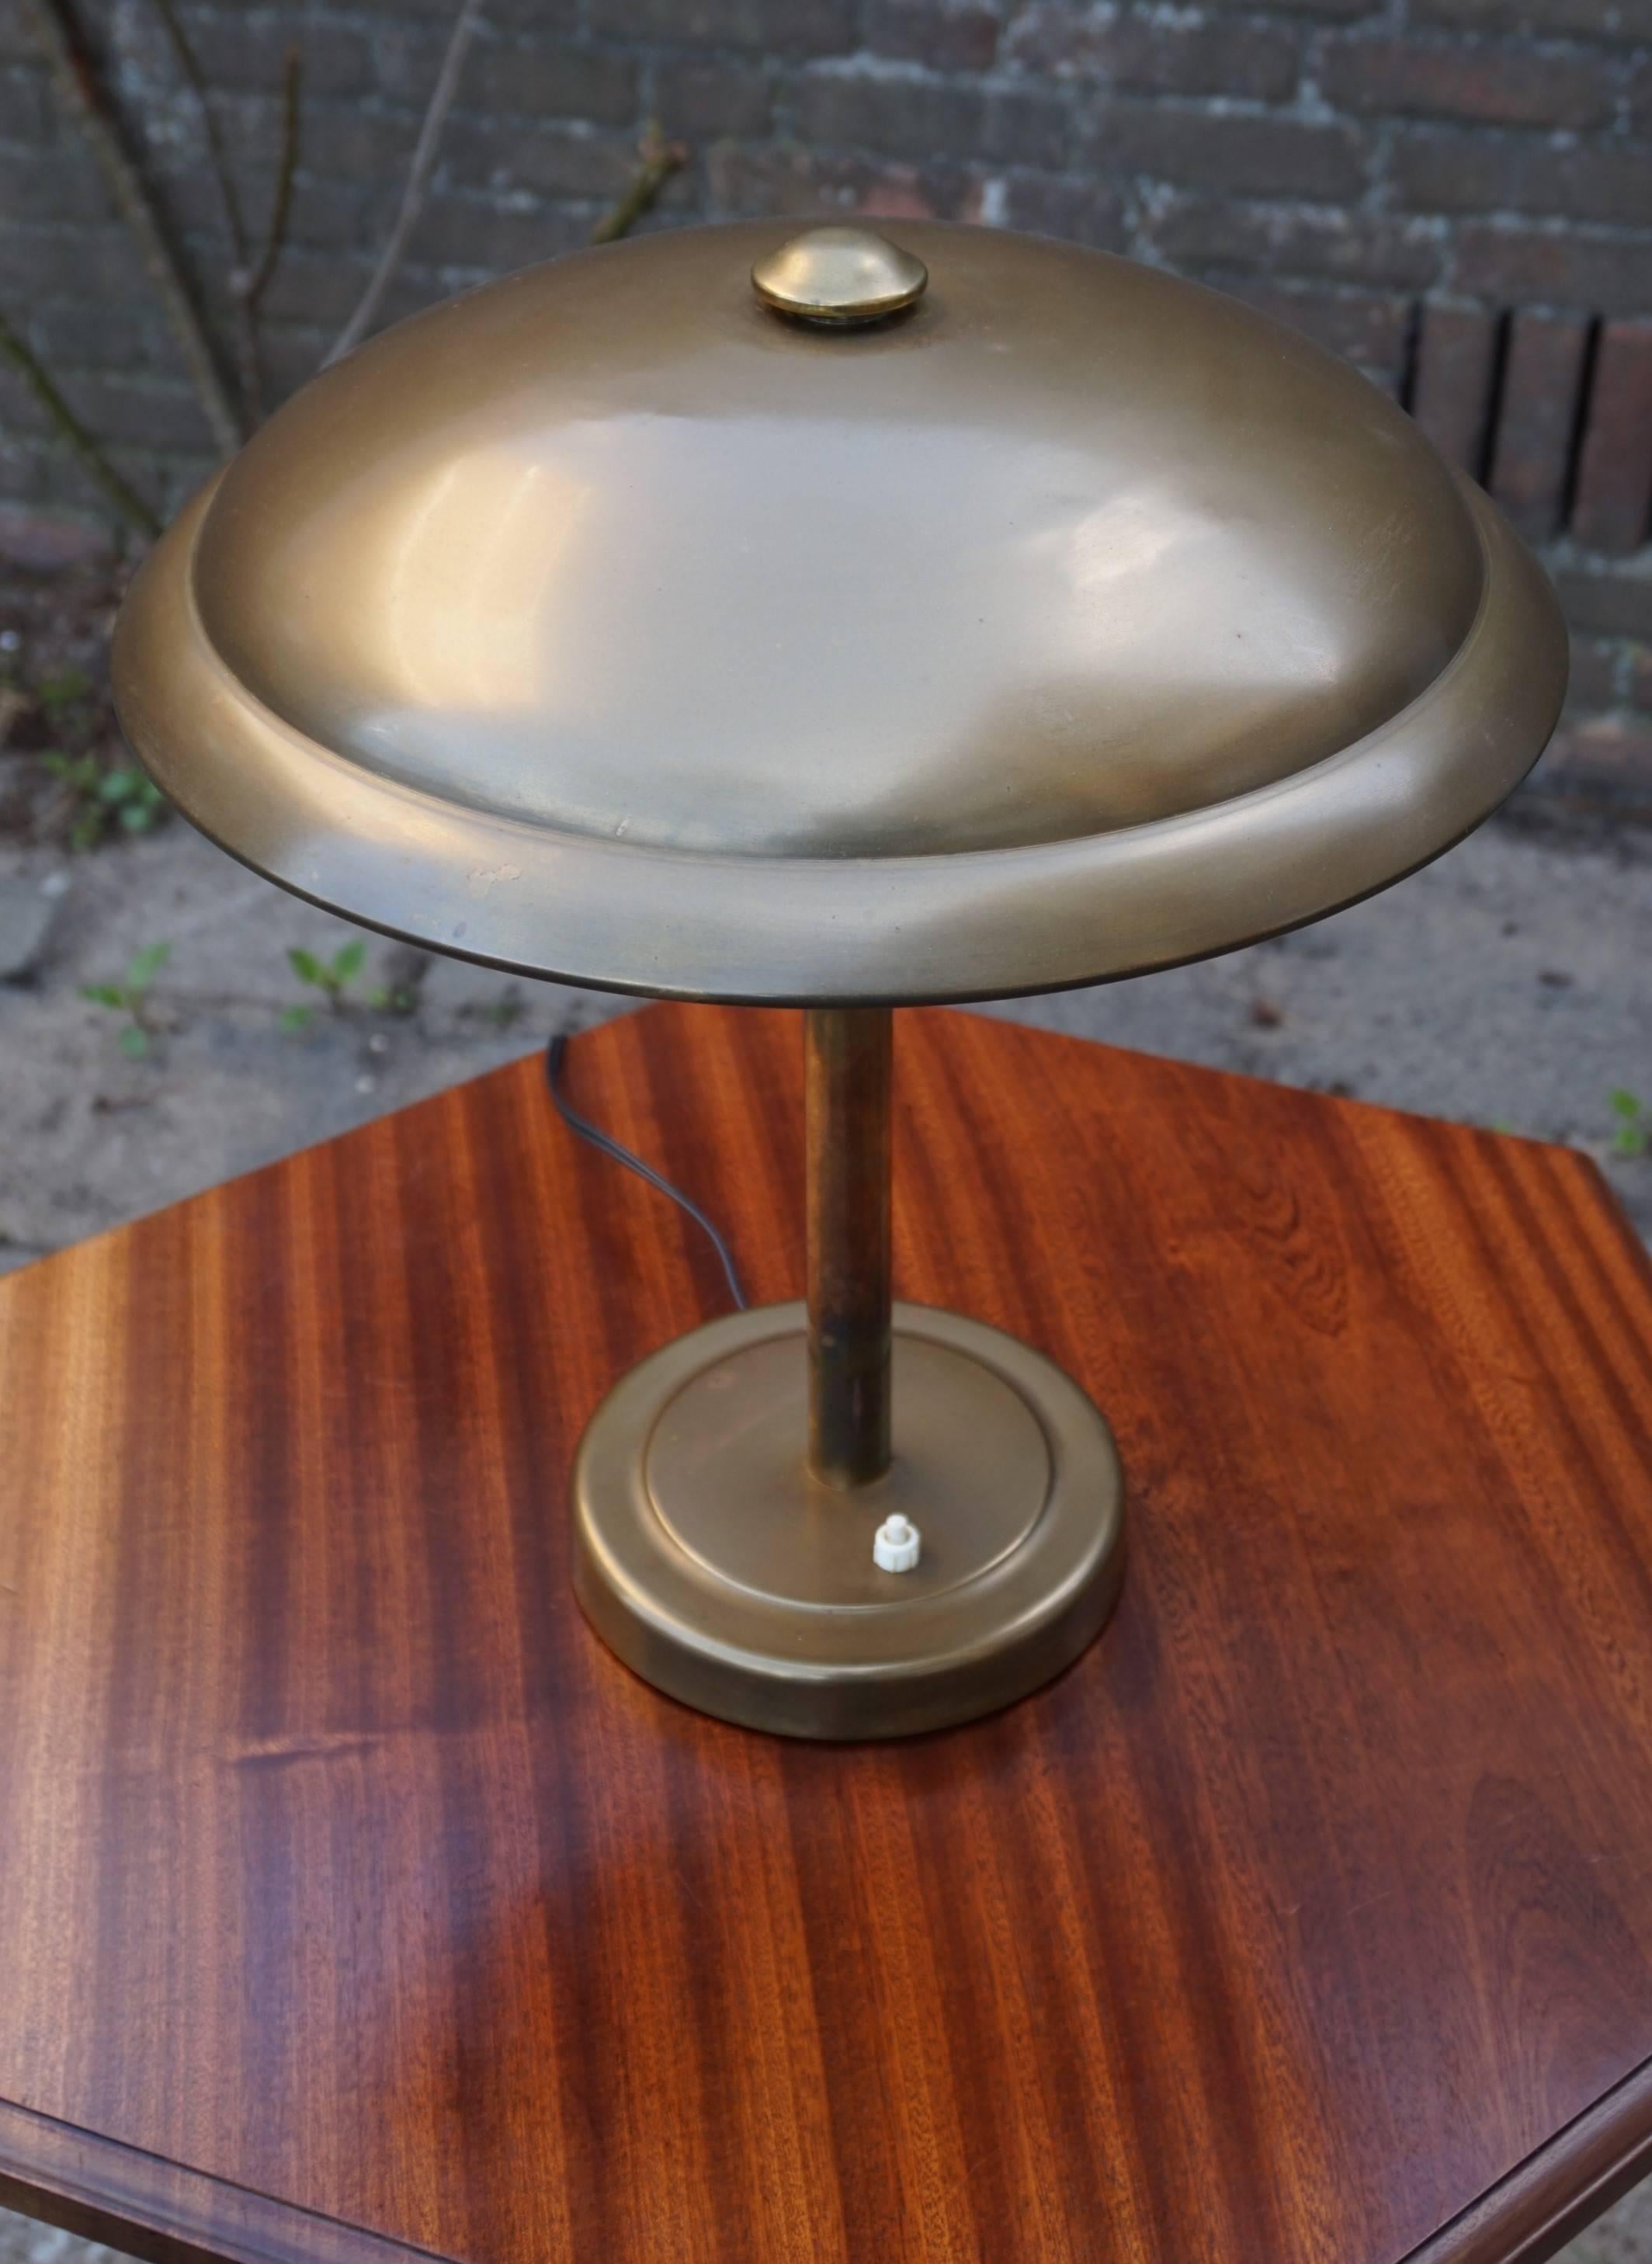 Art Deco Bauhaus Style Table or Desk Lamp, Copper Metal Dish Design Lamp Shade In Good Condition For Sale In Lisse, NL